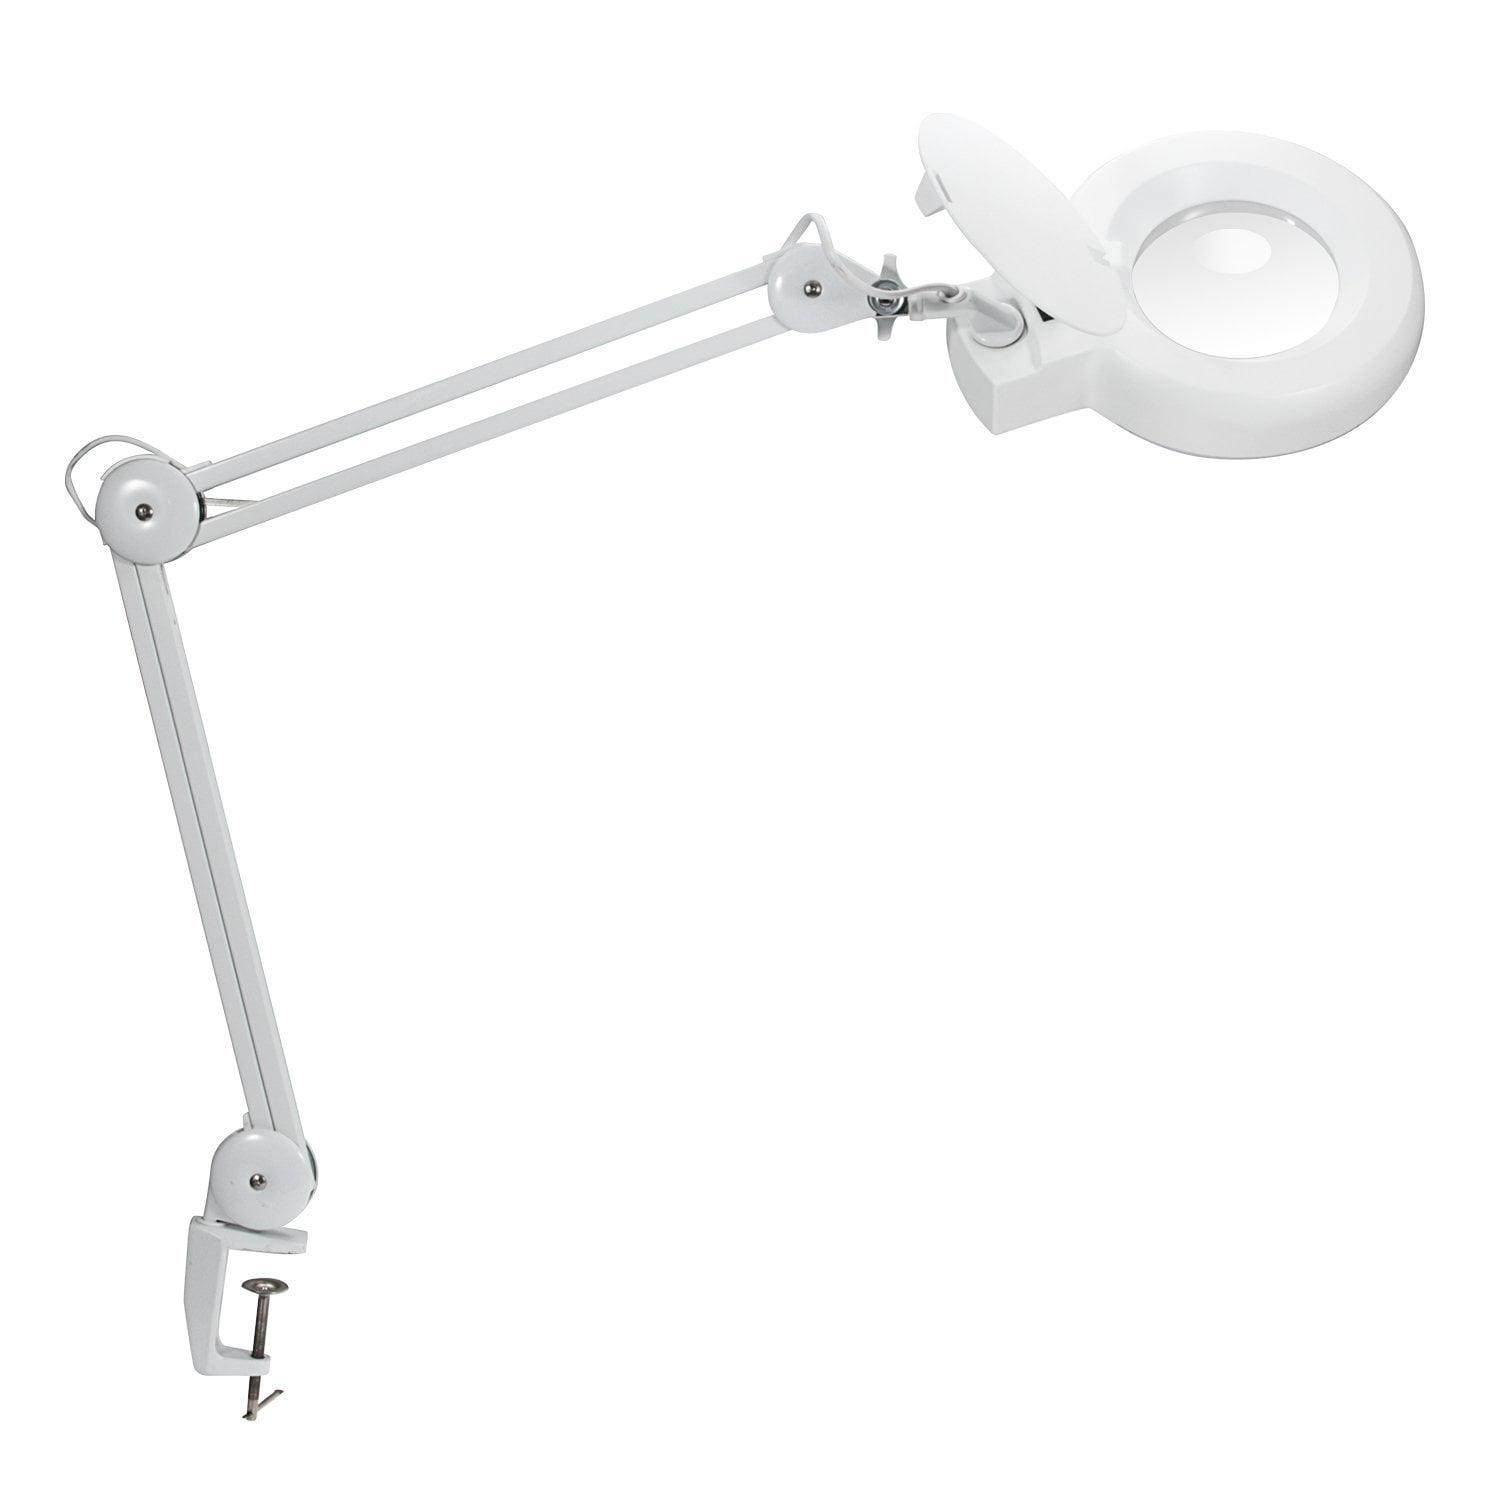 Adjustable Color Temperature Utility Light for Crafts Reading Inspection and Professional Use Lighting LED Magnifying Lamp with Clamp 360°Adjustable Swivel Arm ，Dimmable